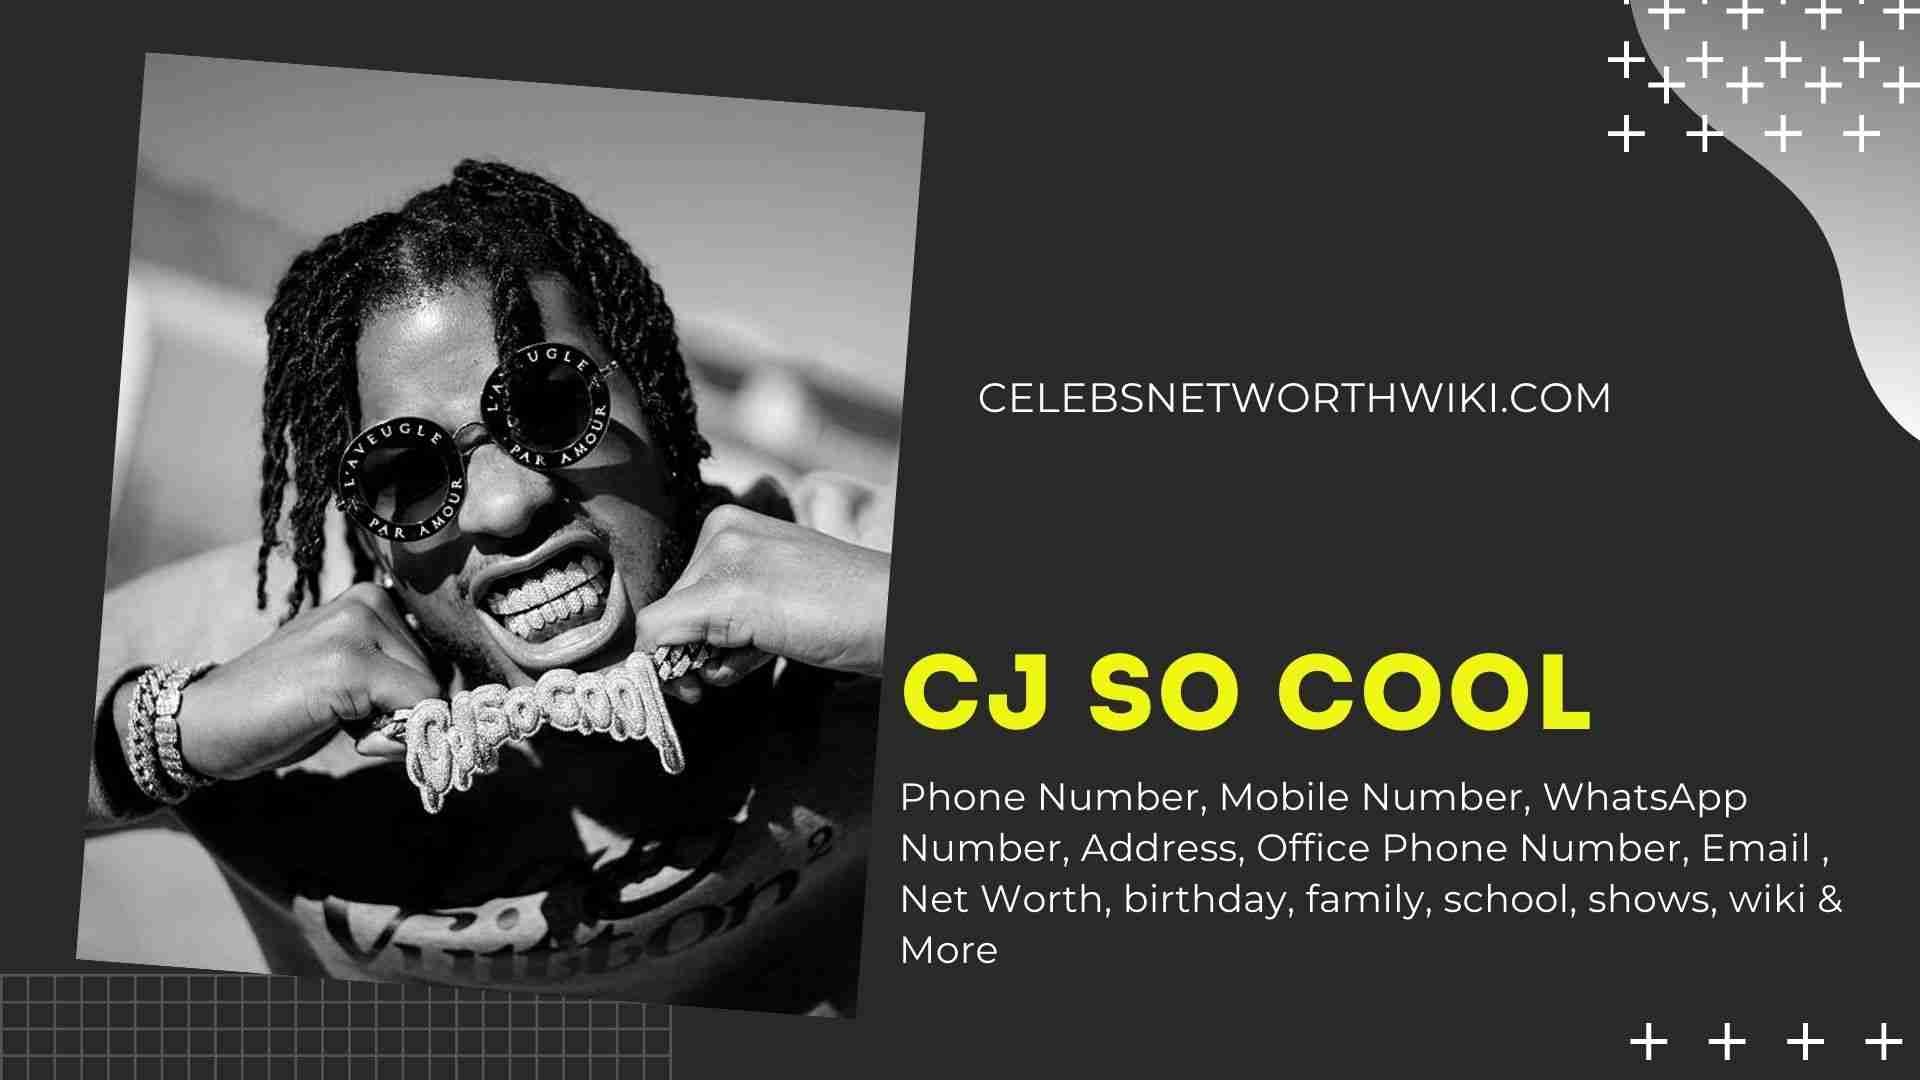 CJ SO COOL Phone Number WhatsApp Number, Contact Number, Mobile Number, Per...